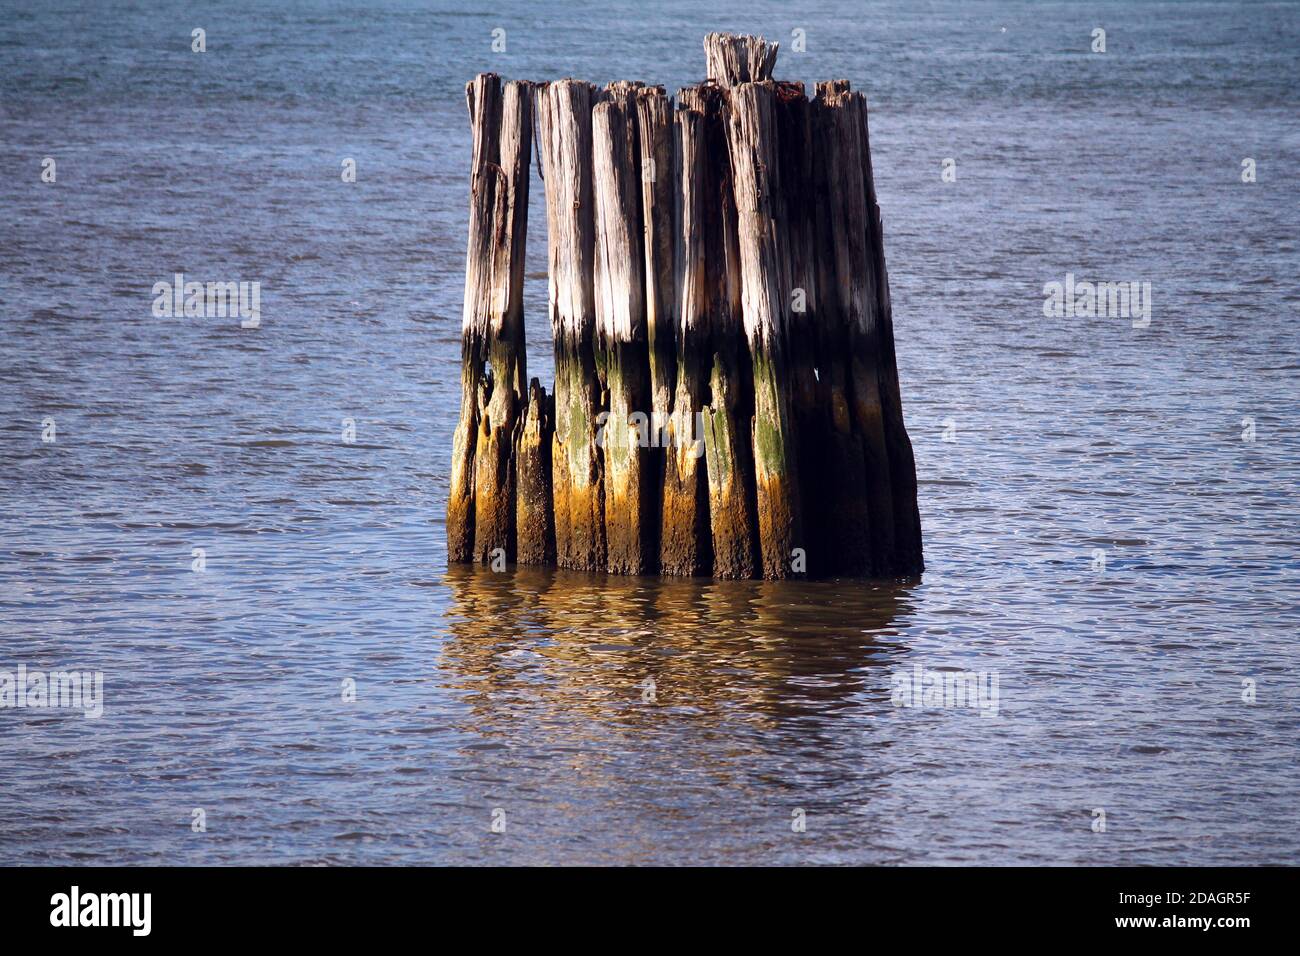 The wooden protections in the calm water Stock Photo